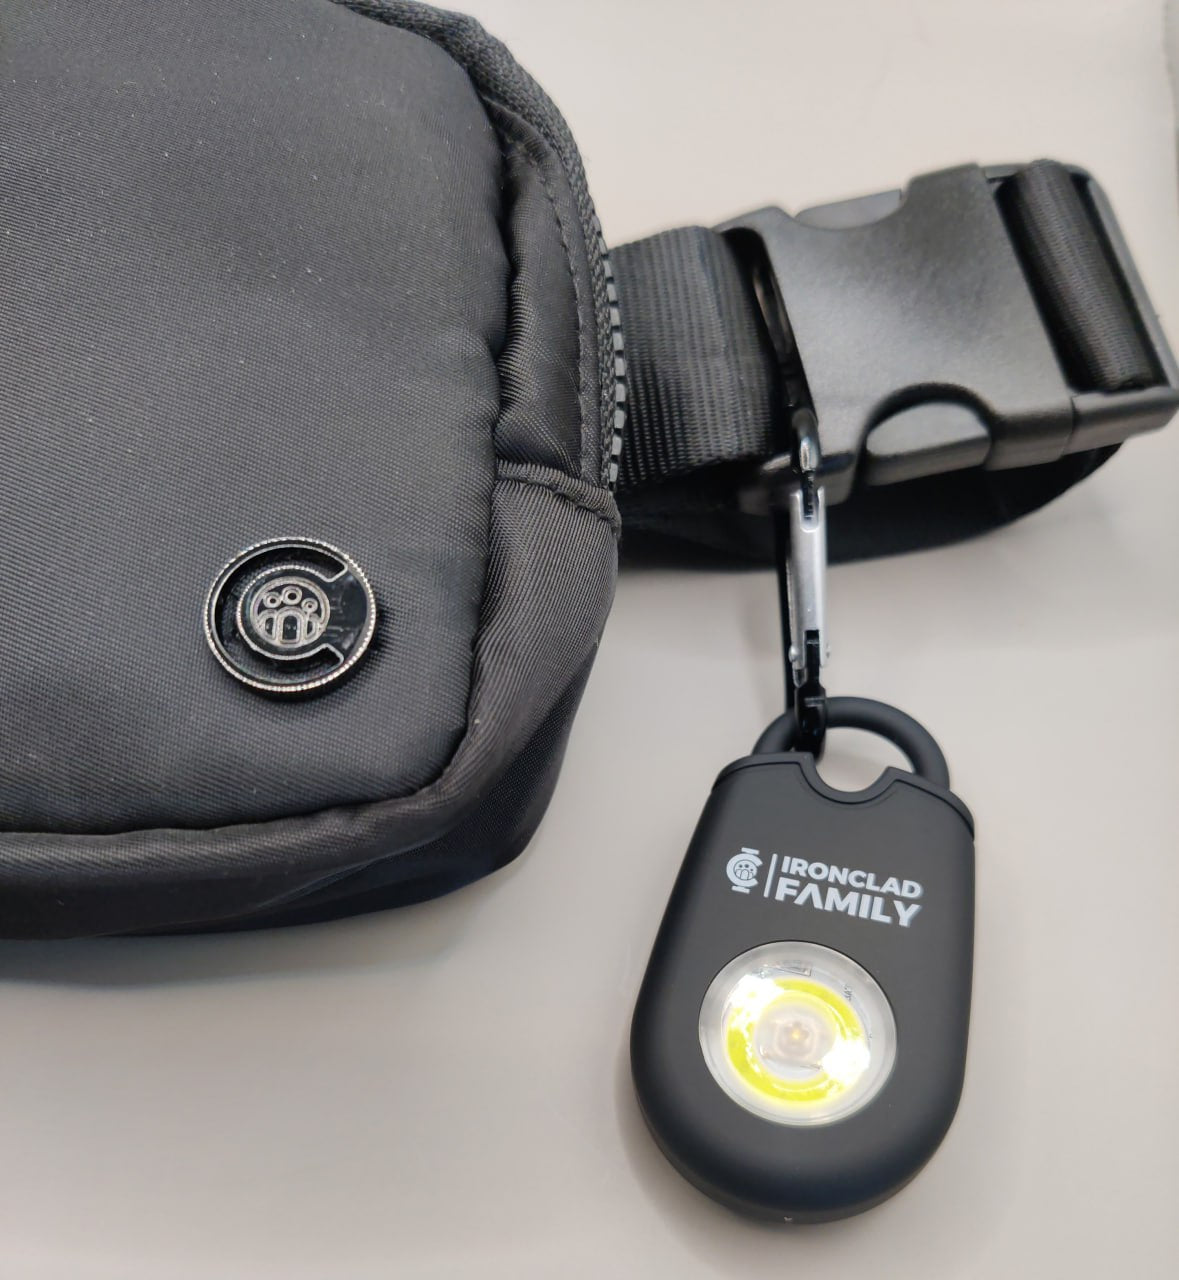 Personal alarm fanny pack with an attached light